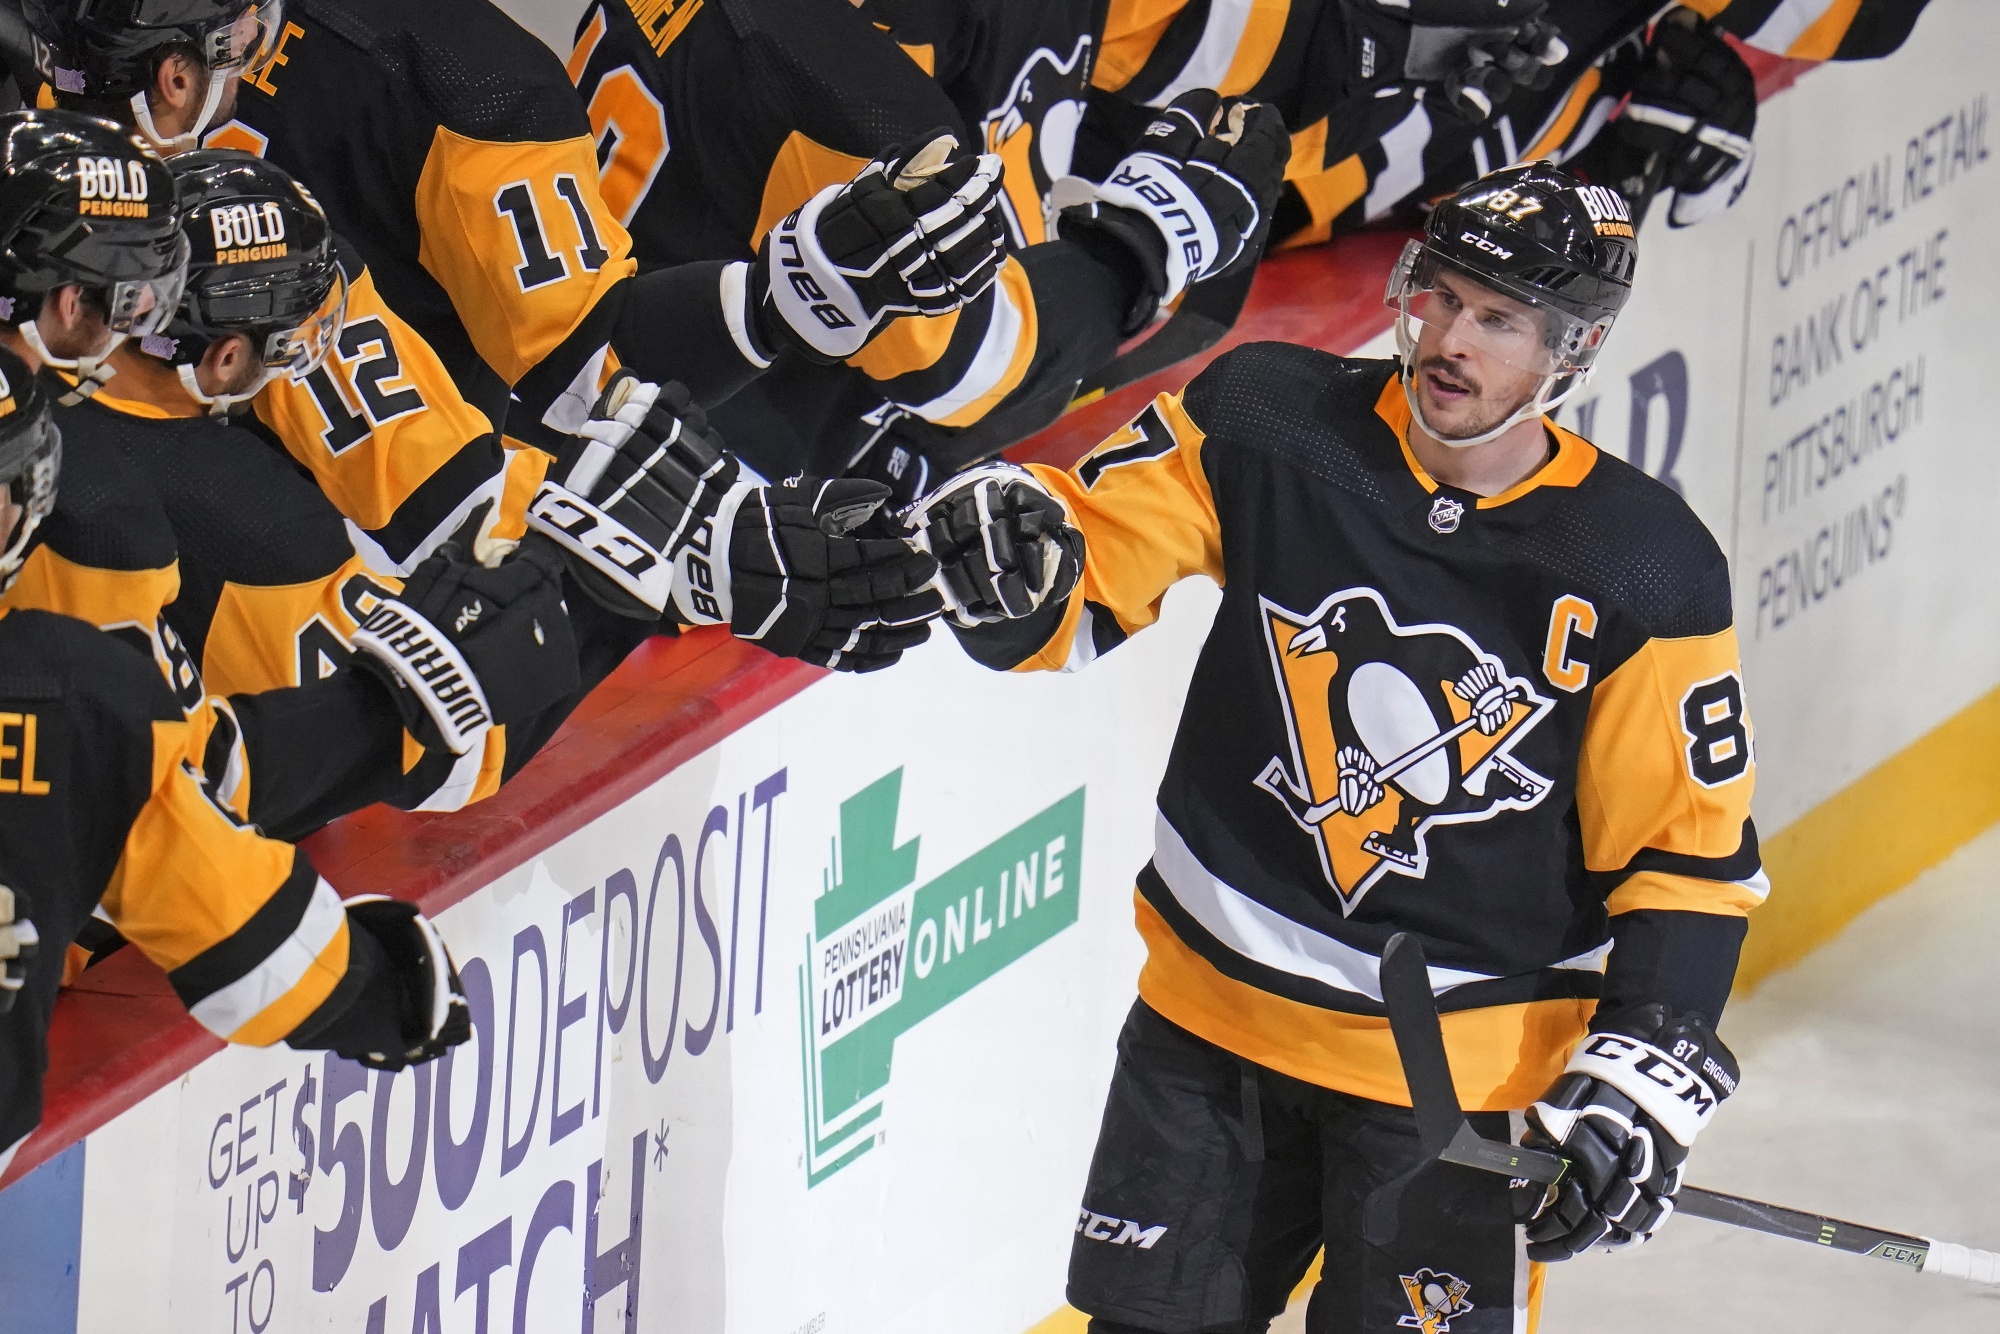 Sidney Crosby loves Penguins' new third jerseys, but hated those